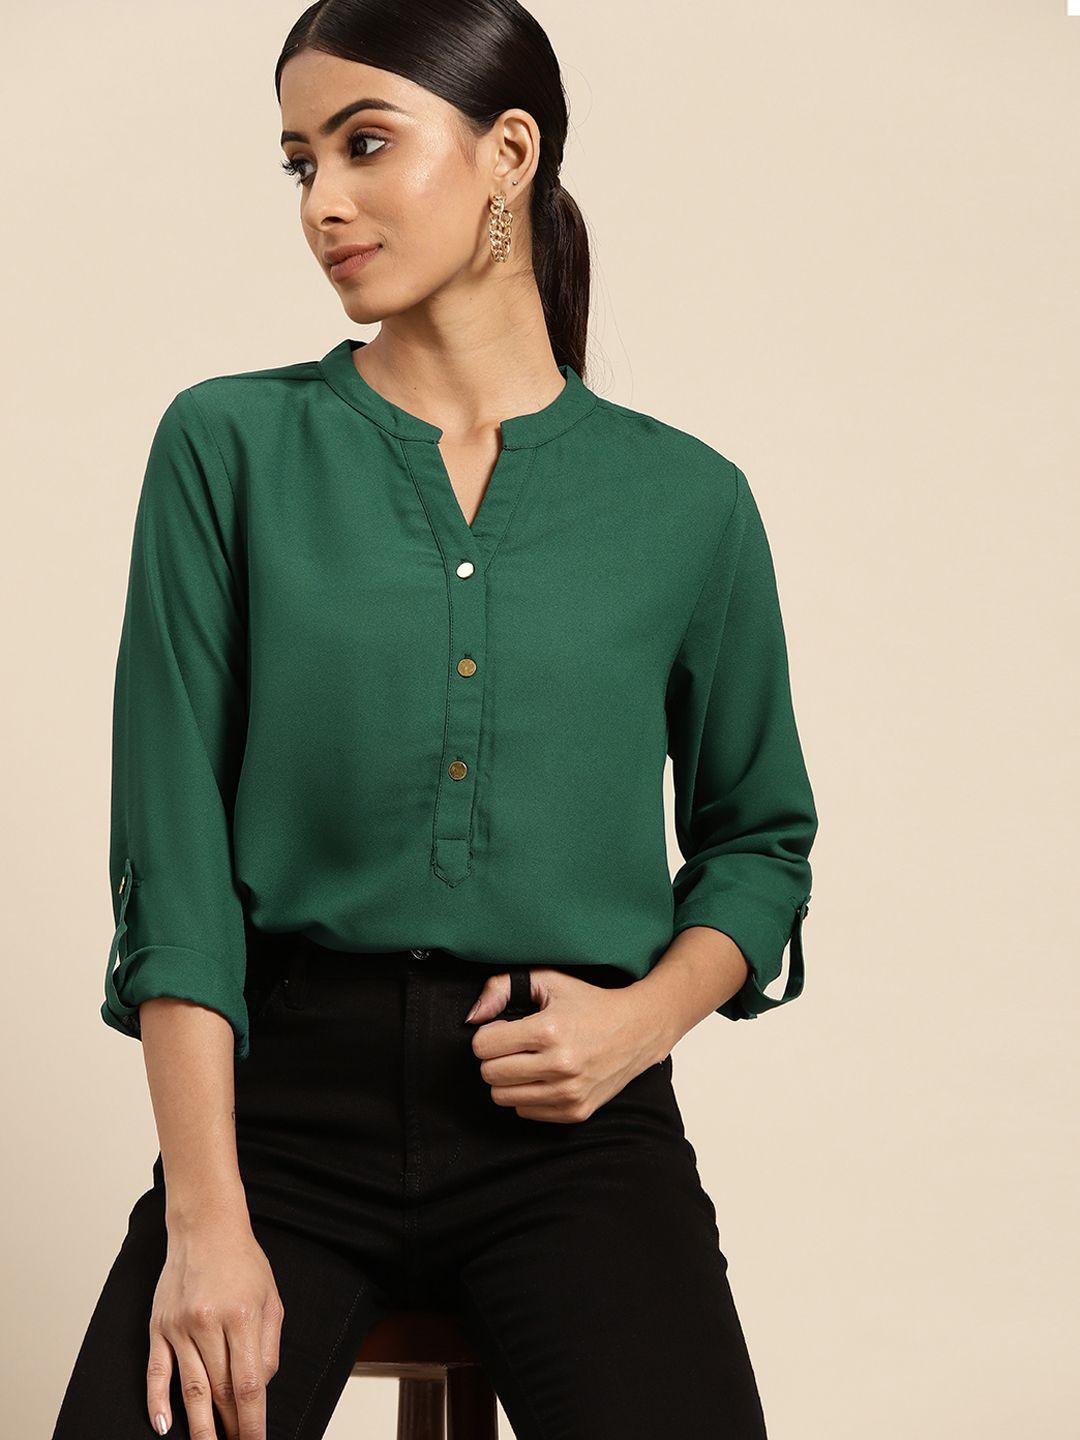 all about you women green solid shirt style top